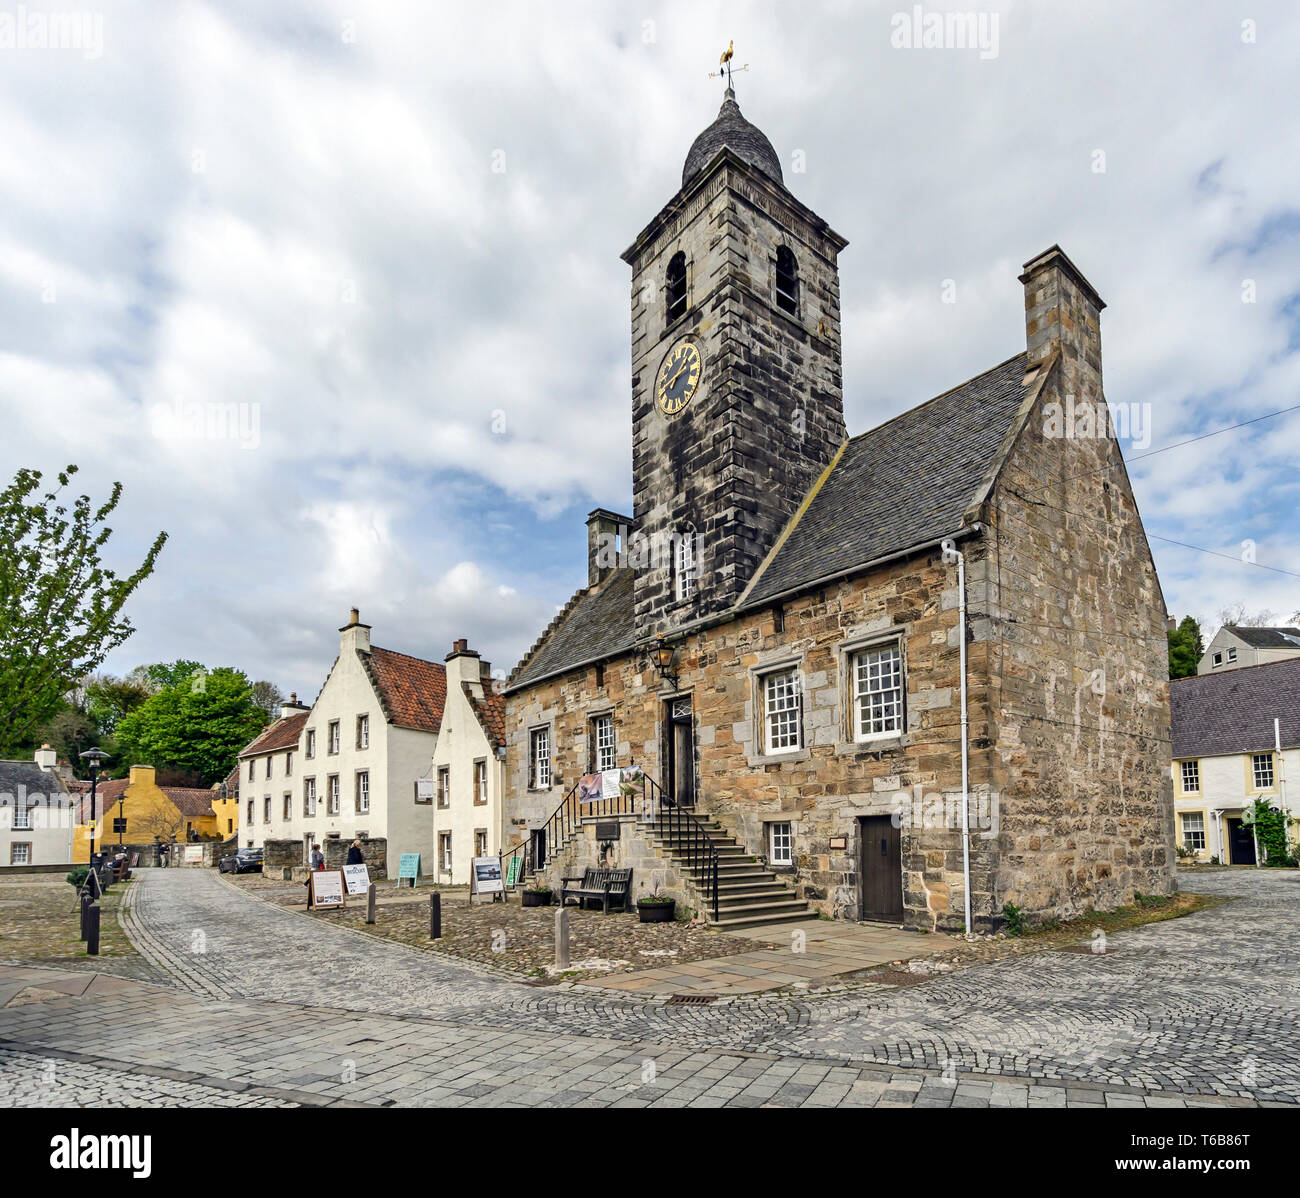 Culross Town House Sandhaven with clock tower in NTS town The Royal Burgh of Culross Fife Scotland UK Stock Photo